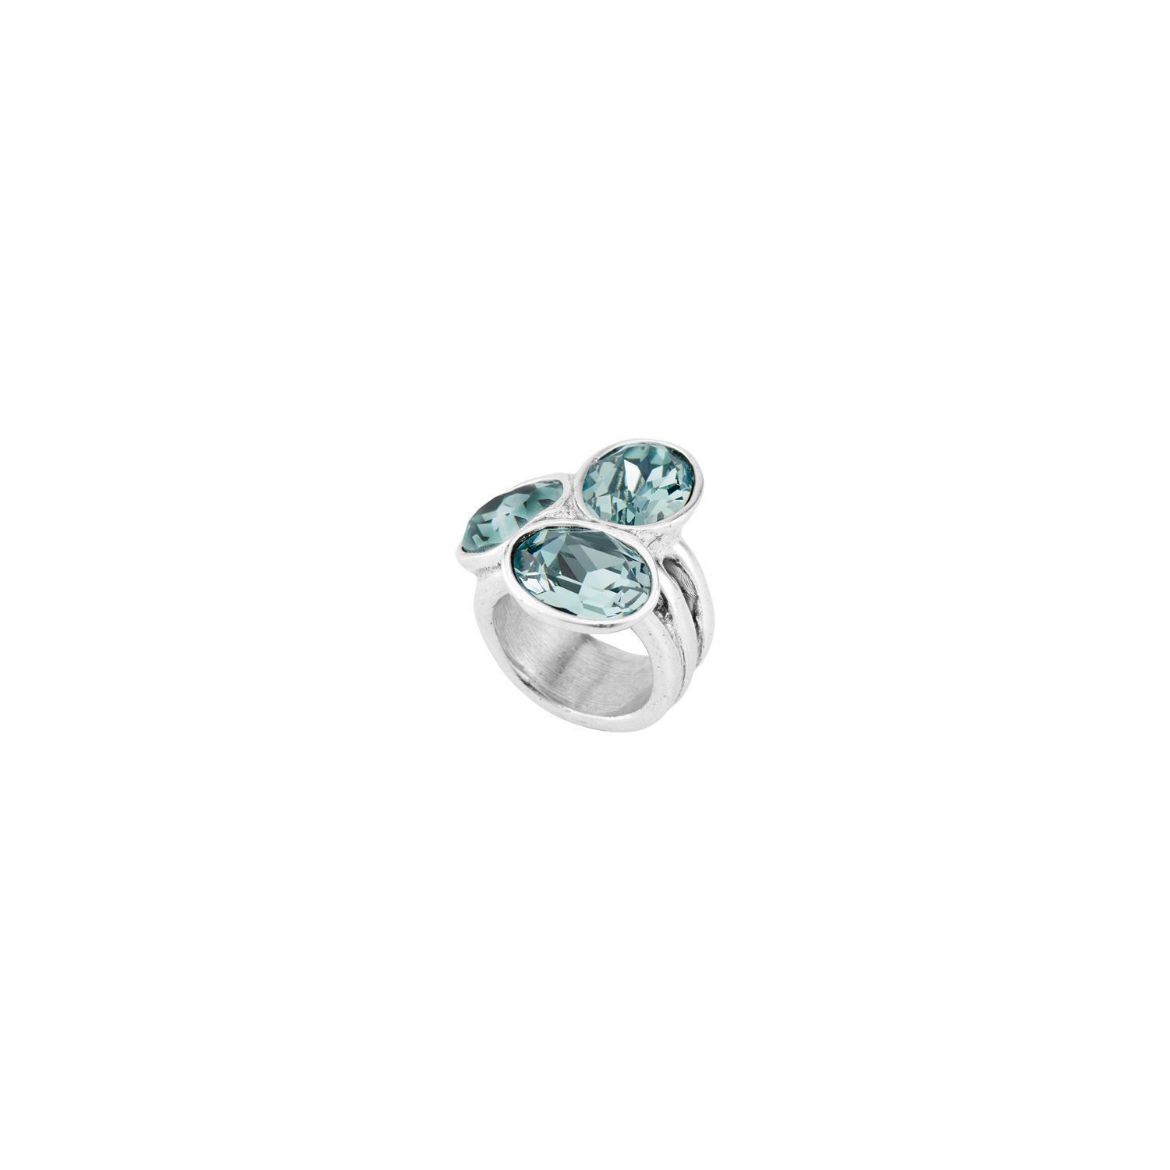 Picture of Treasure Ring In Silver With Blue Swarovskis